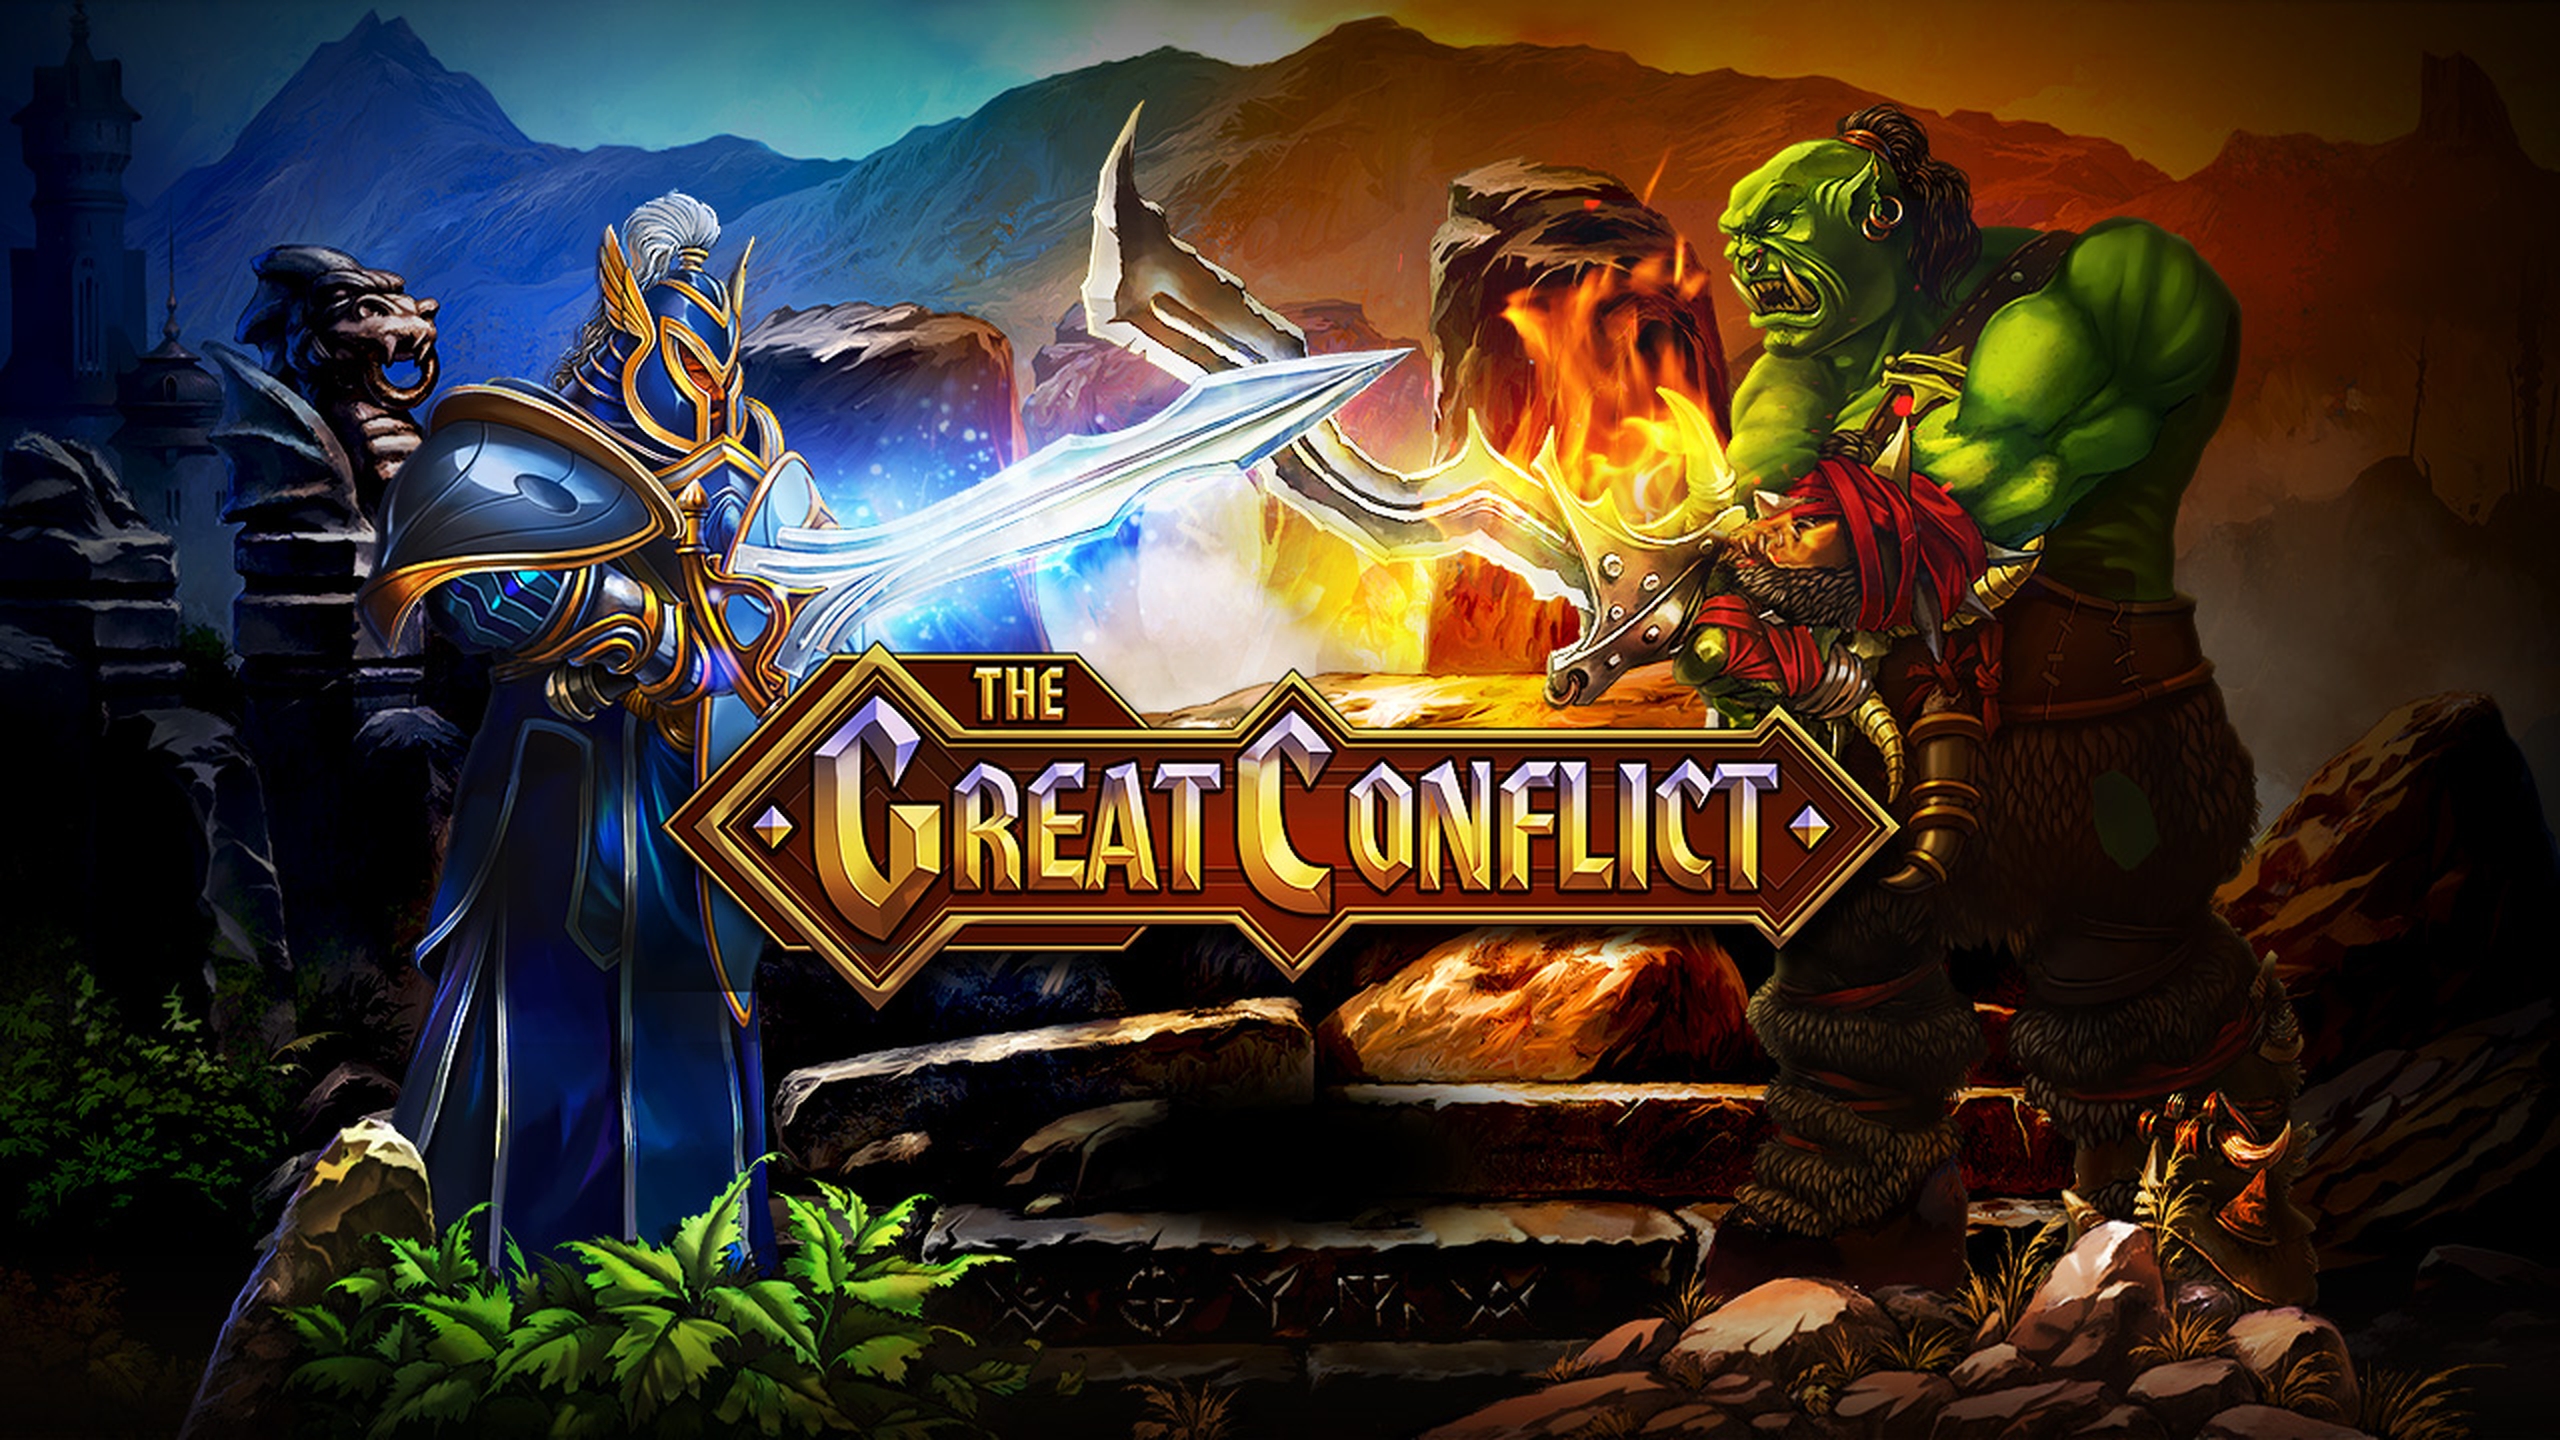 The Great Conflict demo